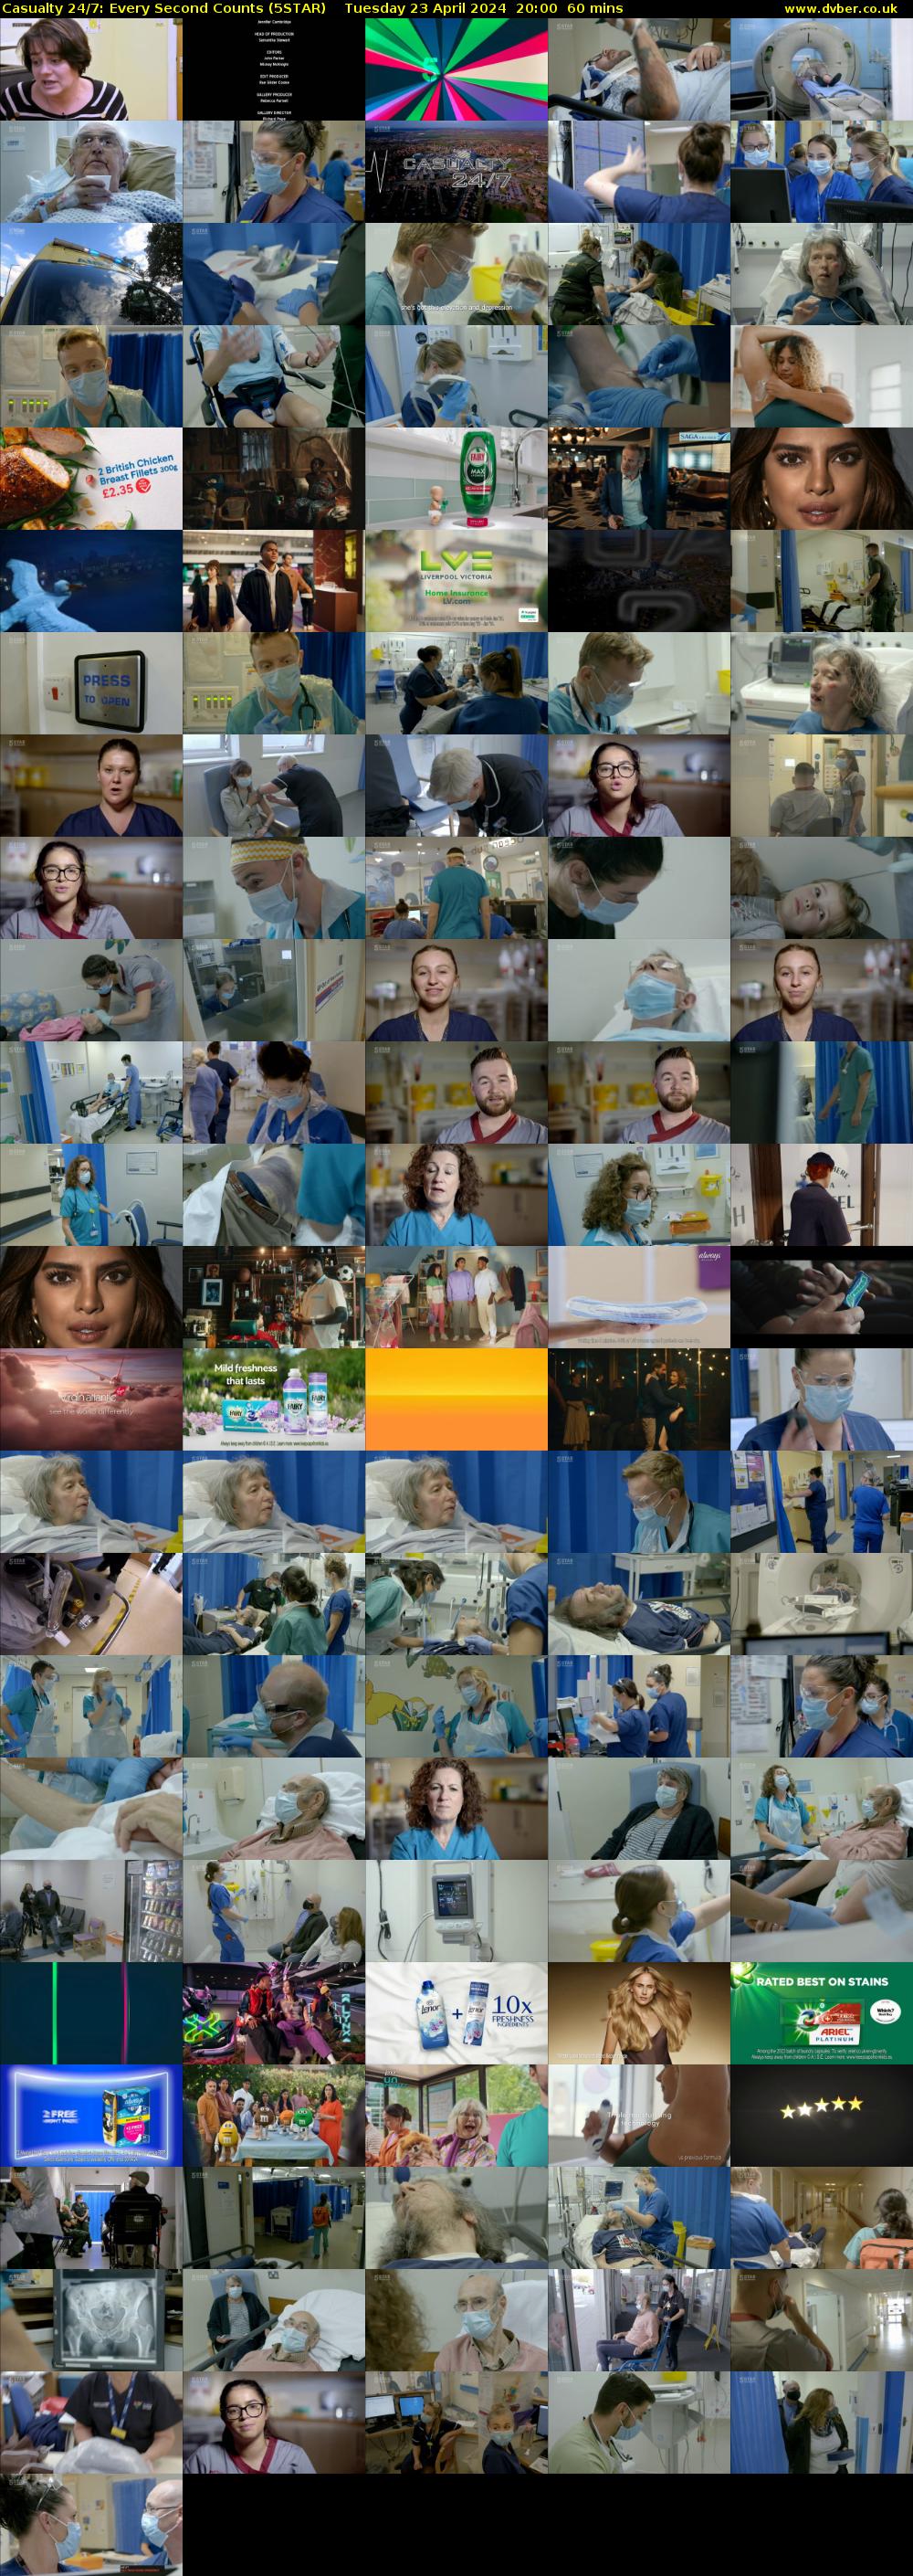 Casualty 24/7: Every Second Counts (5STAR) Tuesday 23 April 2024 20:00 - 21:00